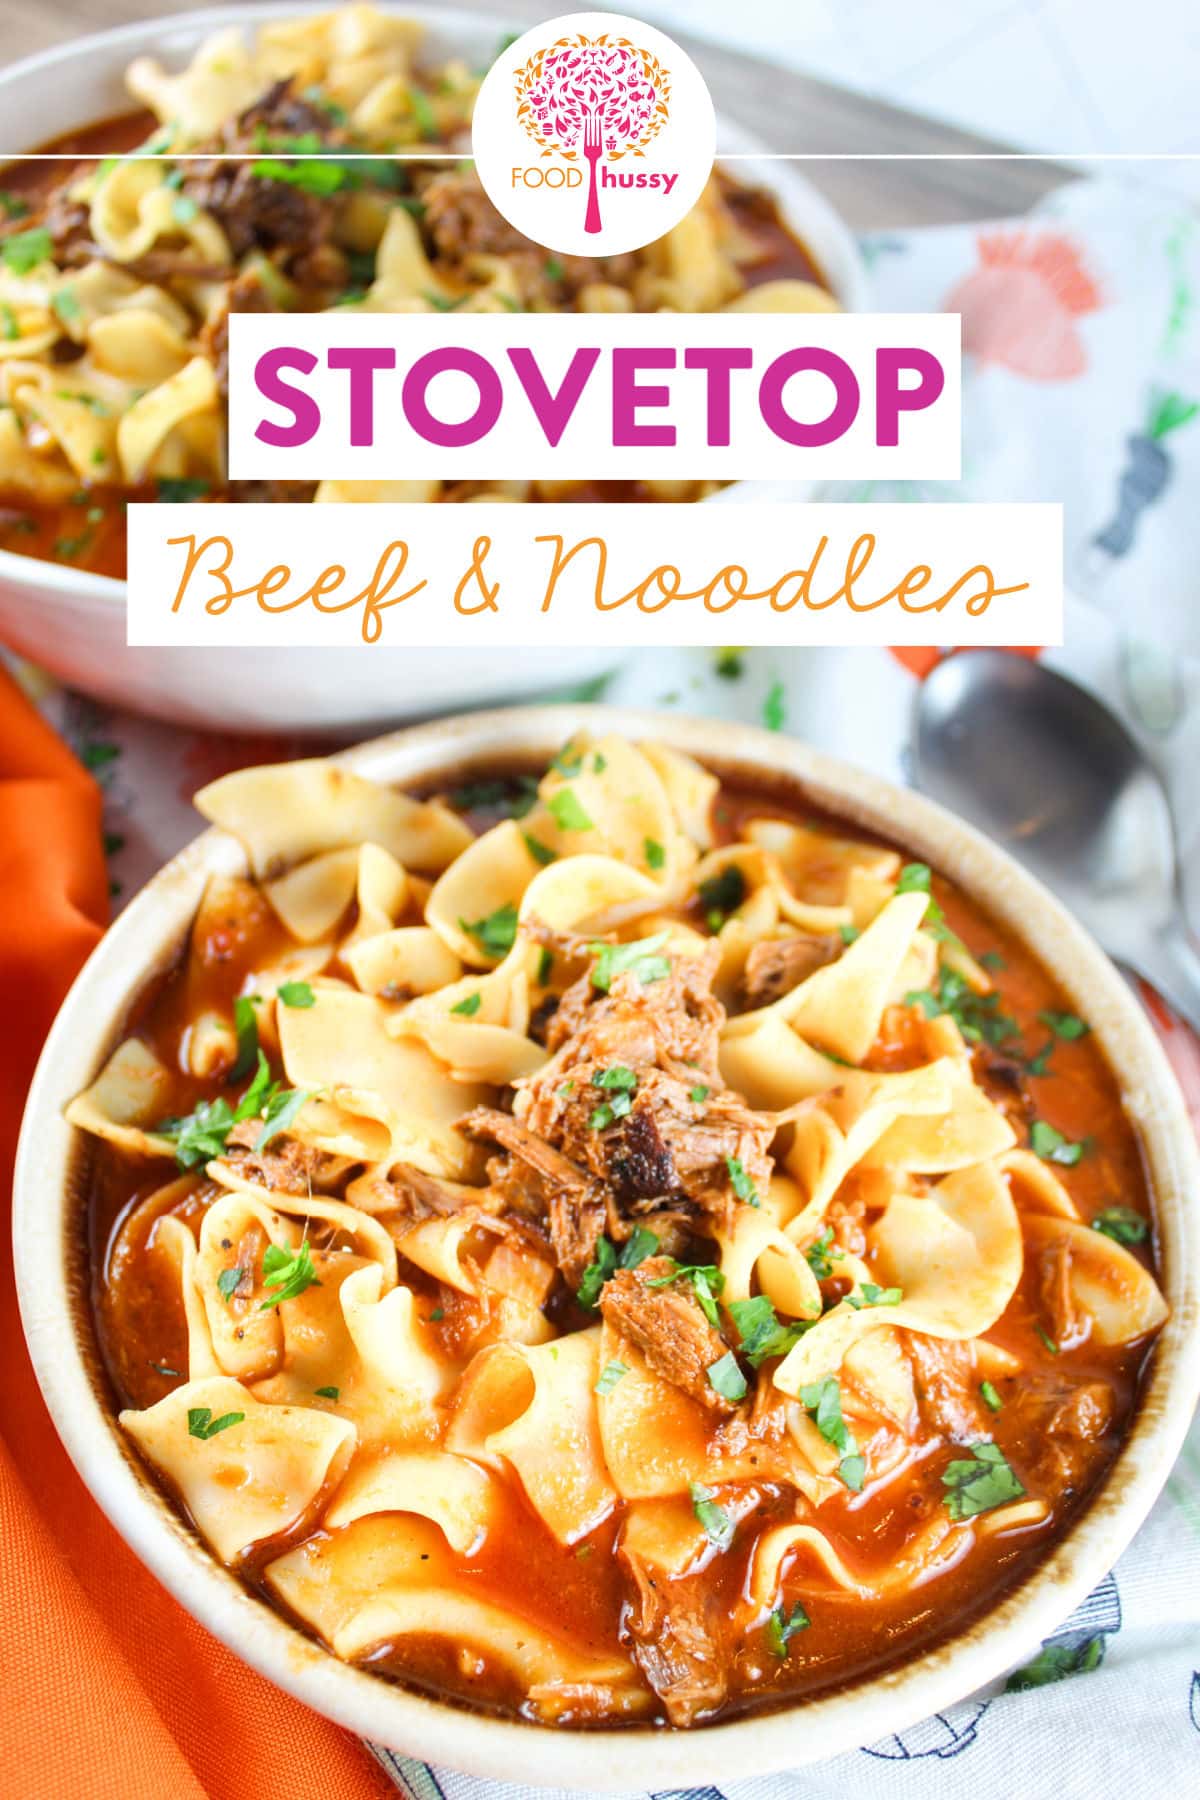 These Easy Stovetop Beef & Noodles are comfort food at its best! Chock full of tender shredded beef, egg noodles and a rich tomato sauce - it tastes just like your grandma used to make! via @foodhussy